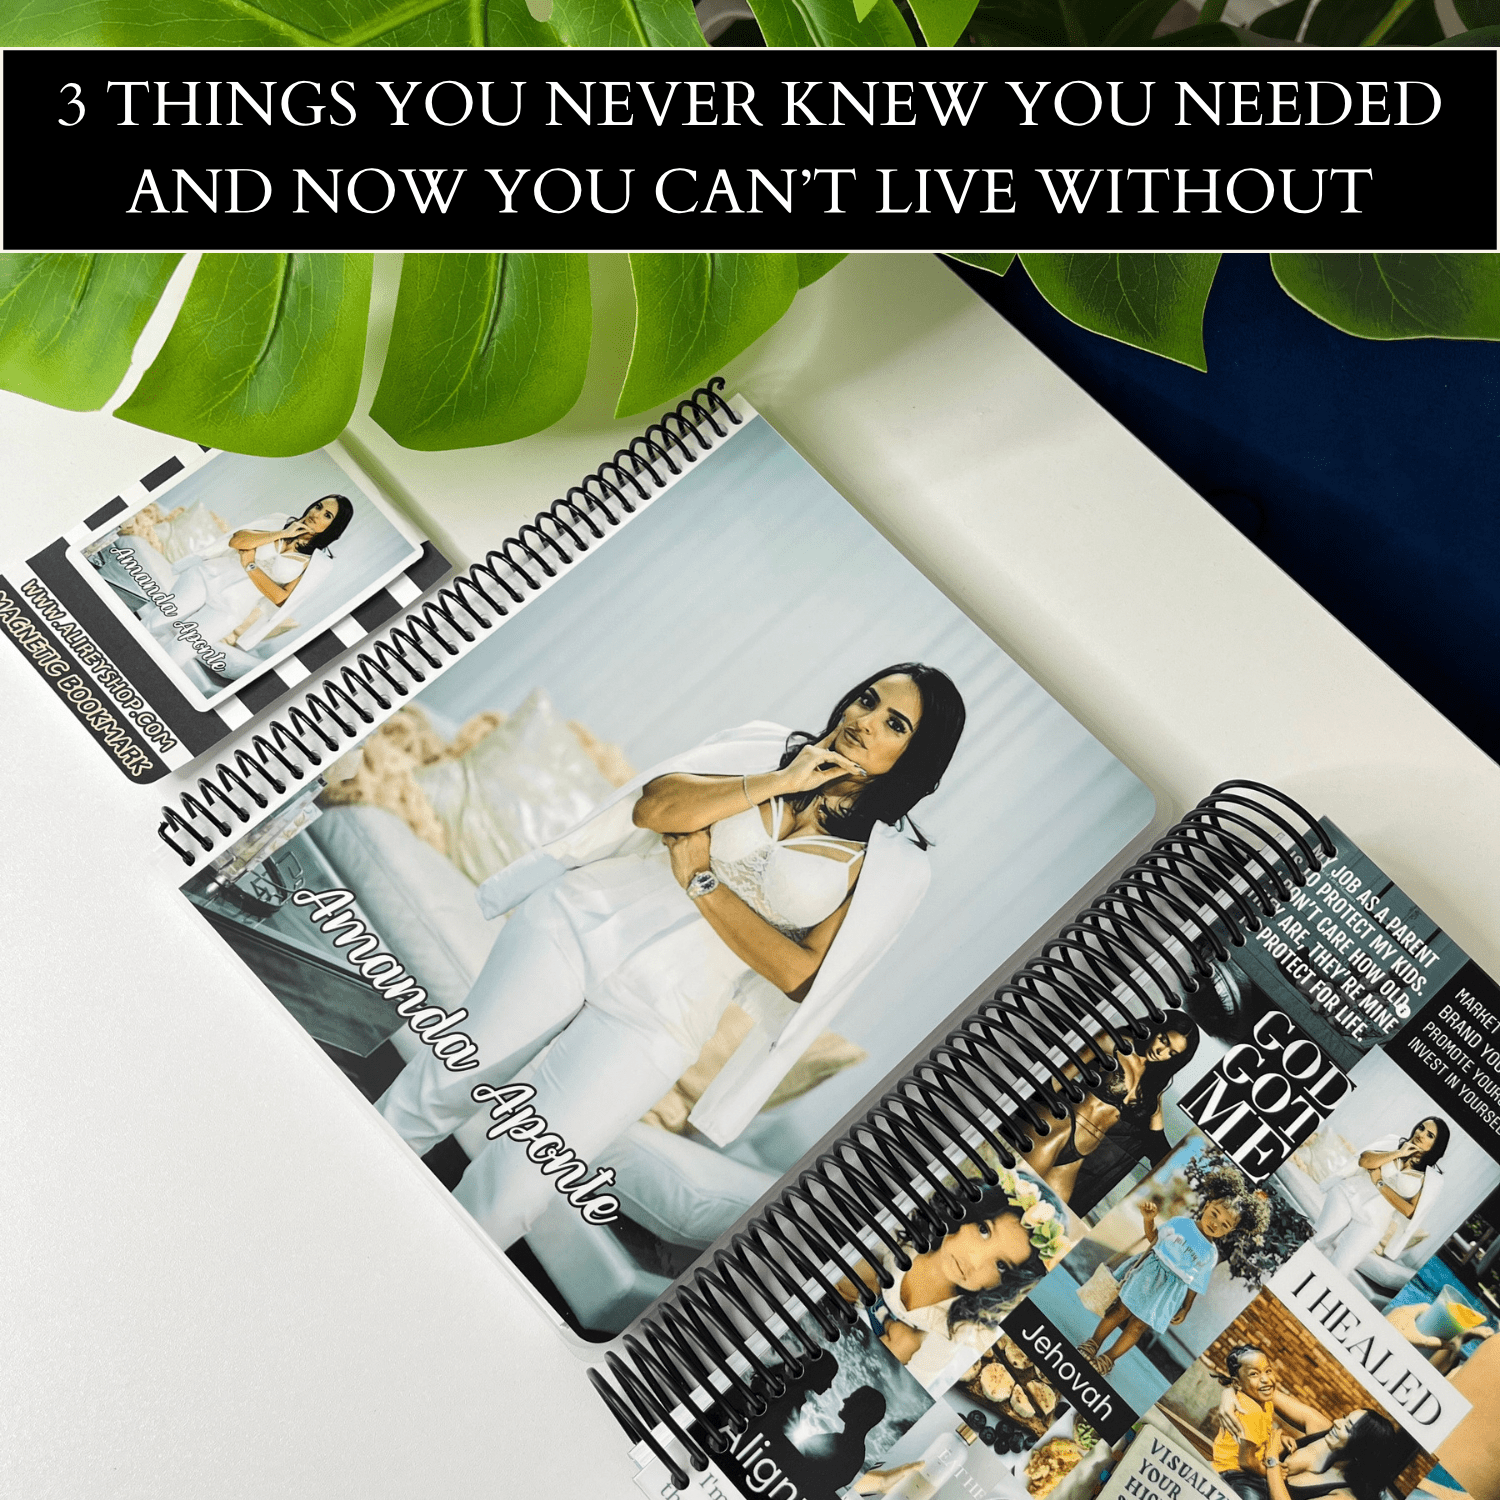 THE ULTIMATE PLANNER GIRL